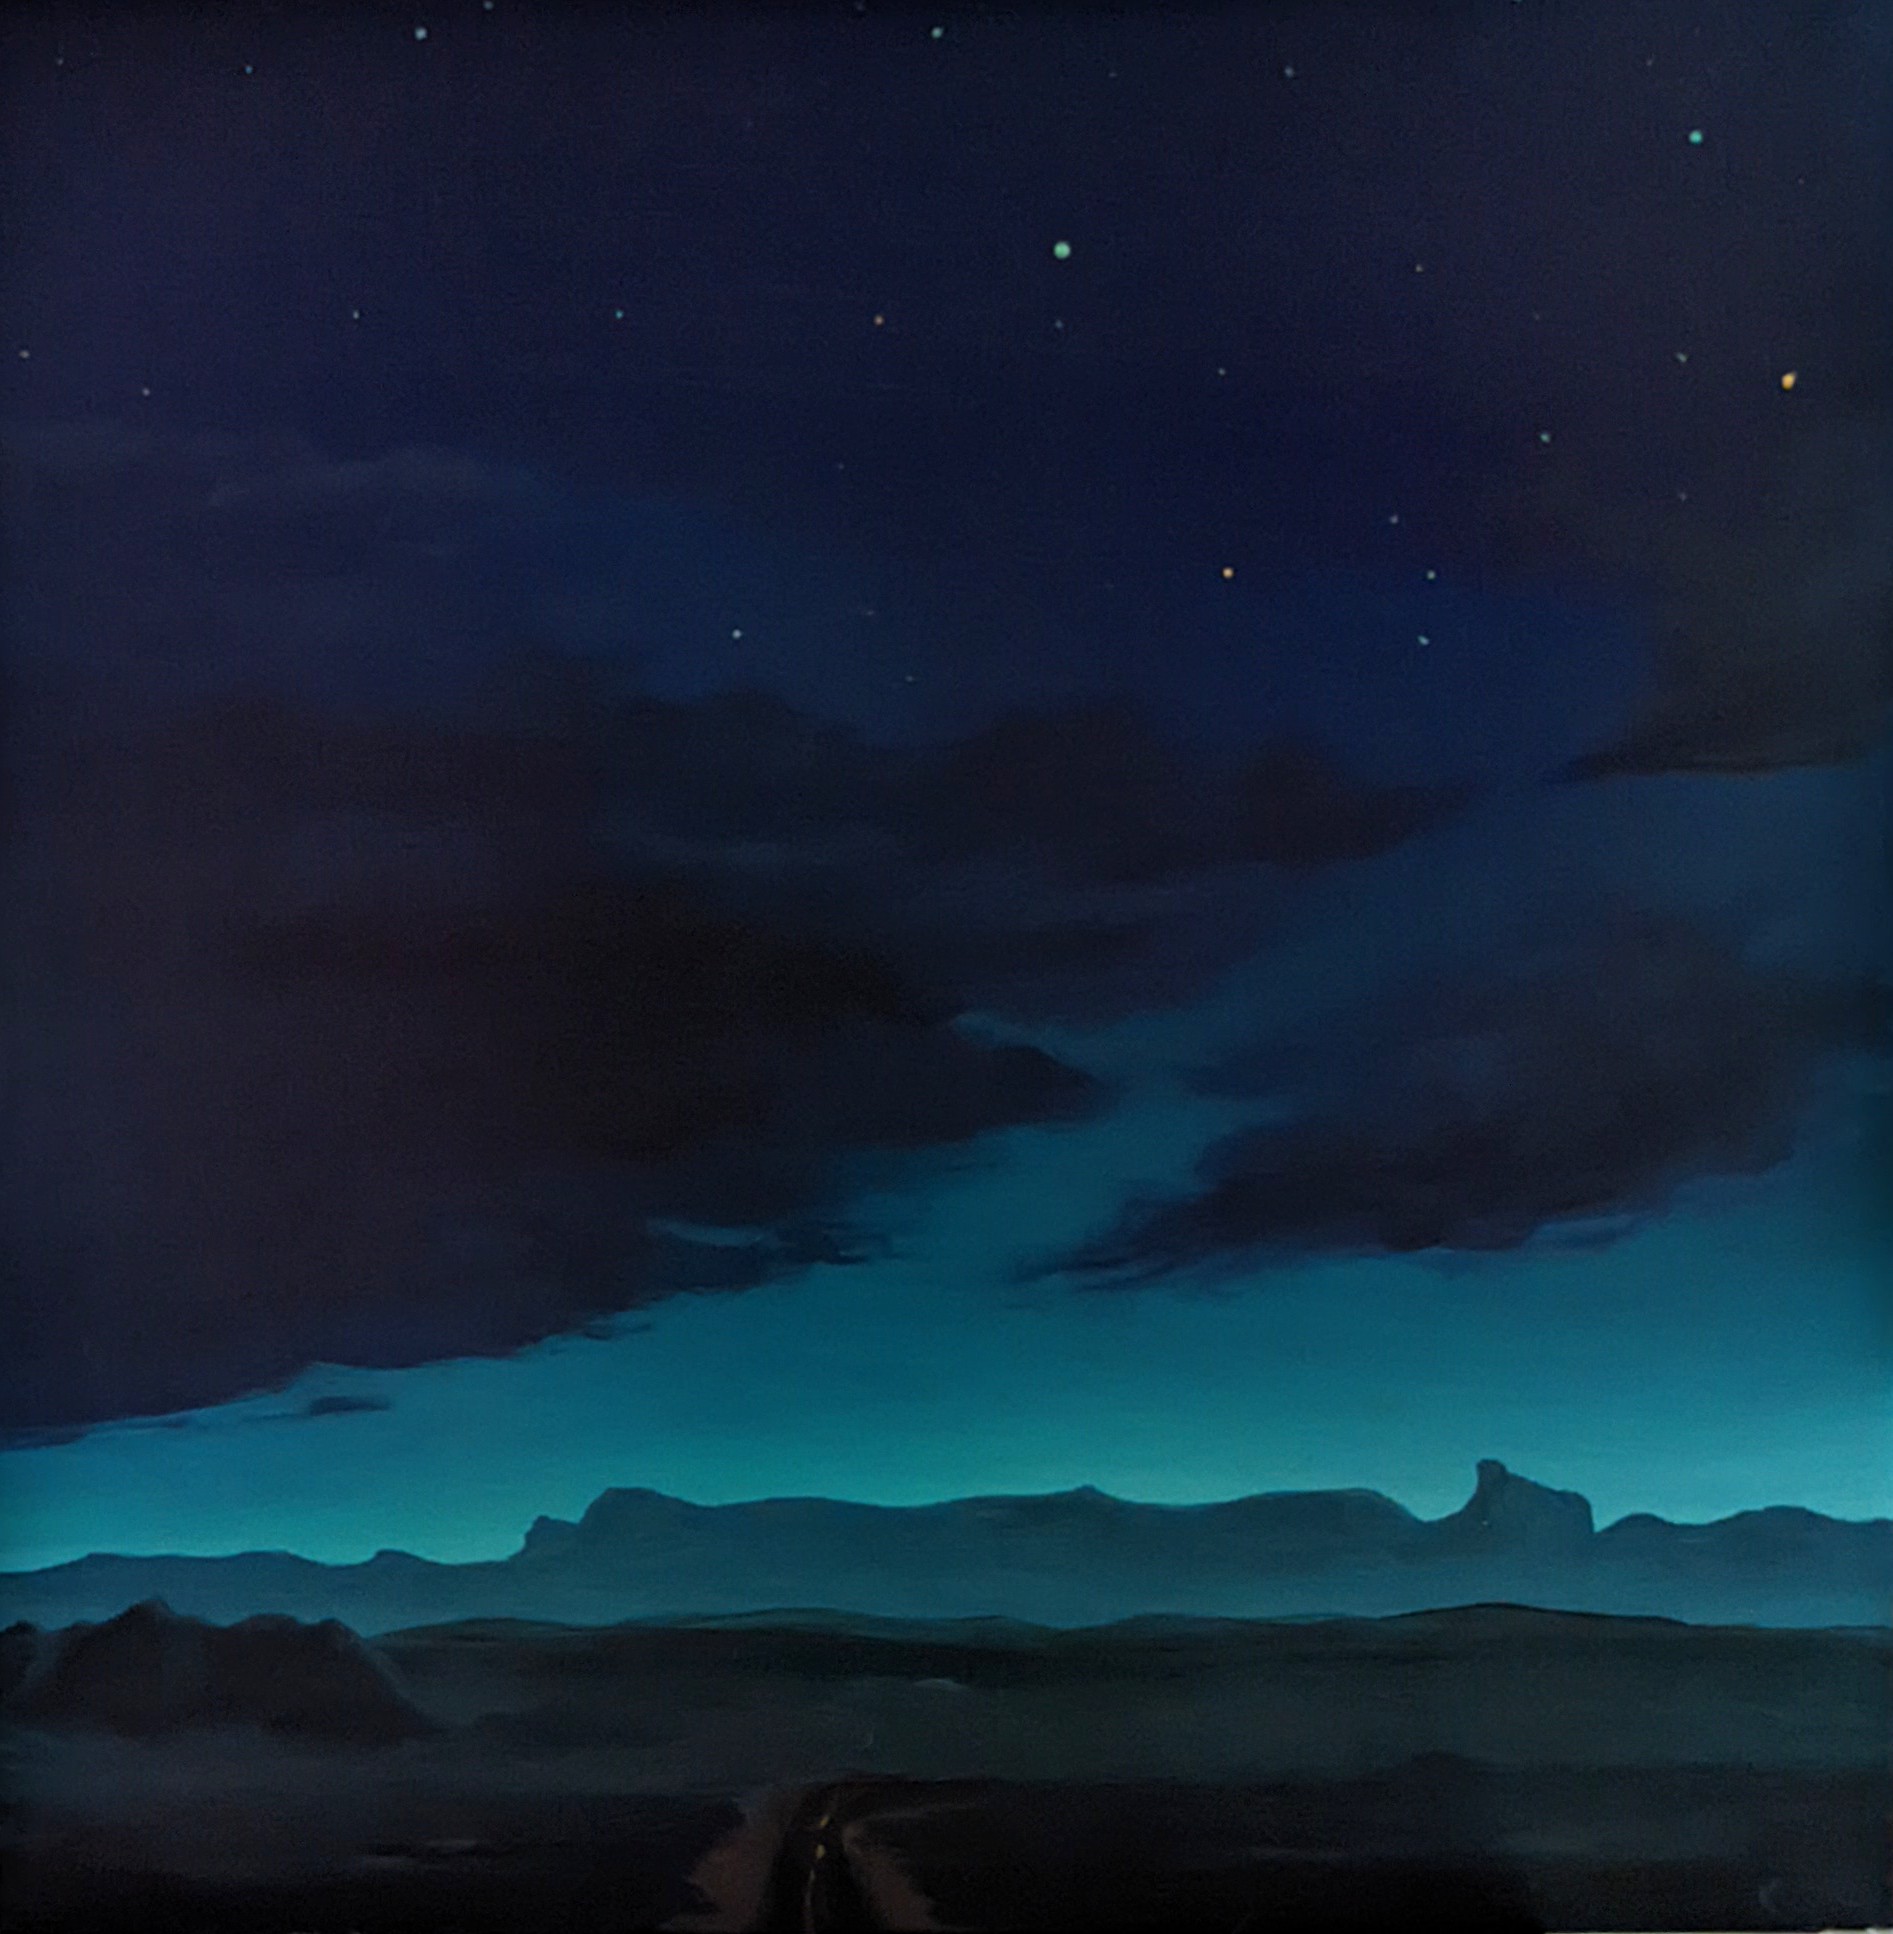 painting of a night sky above a desert landscape